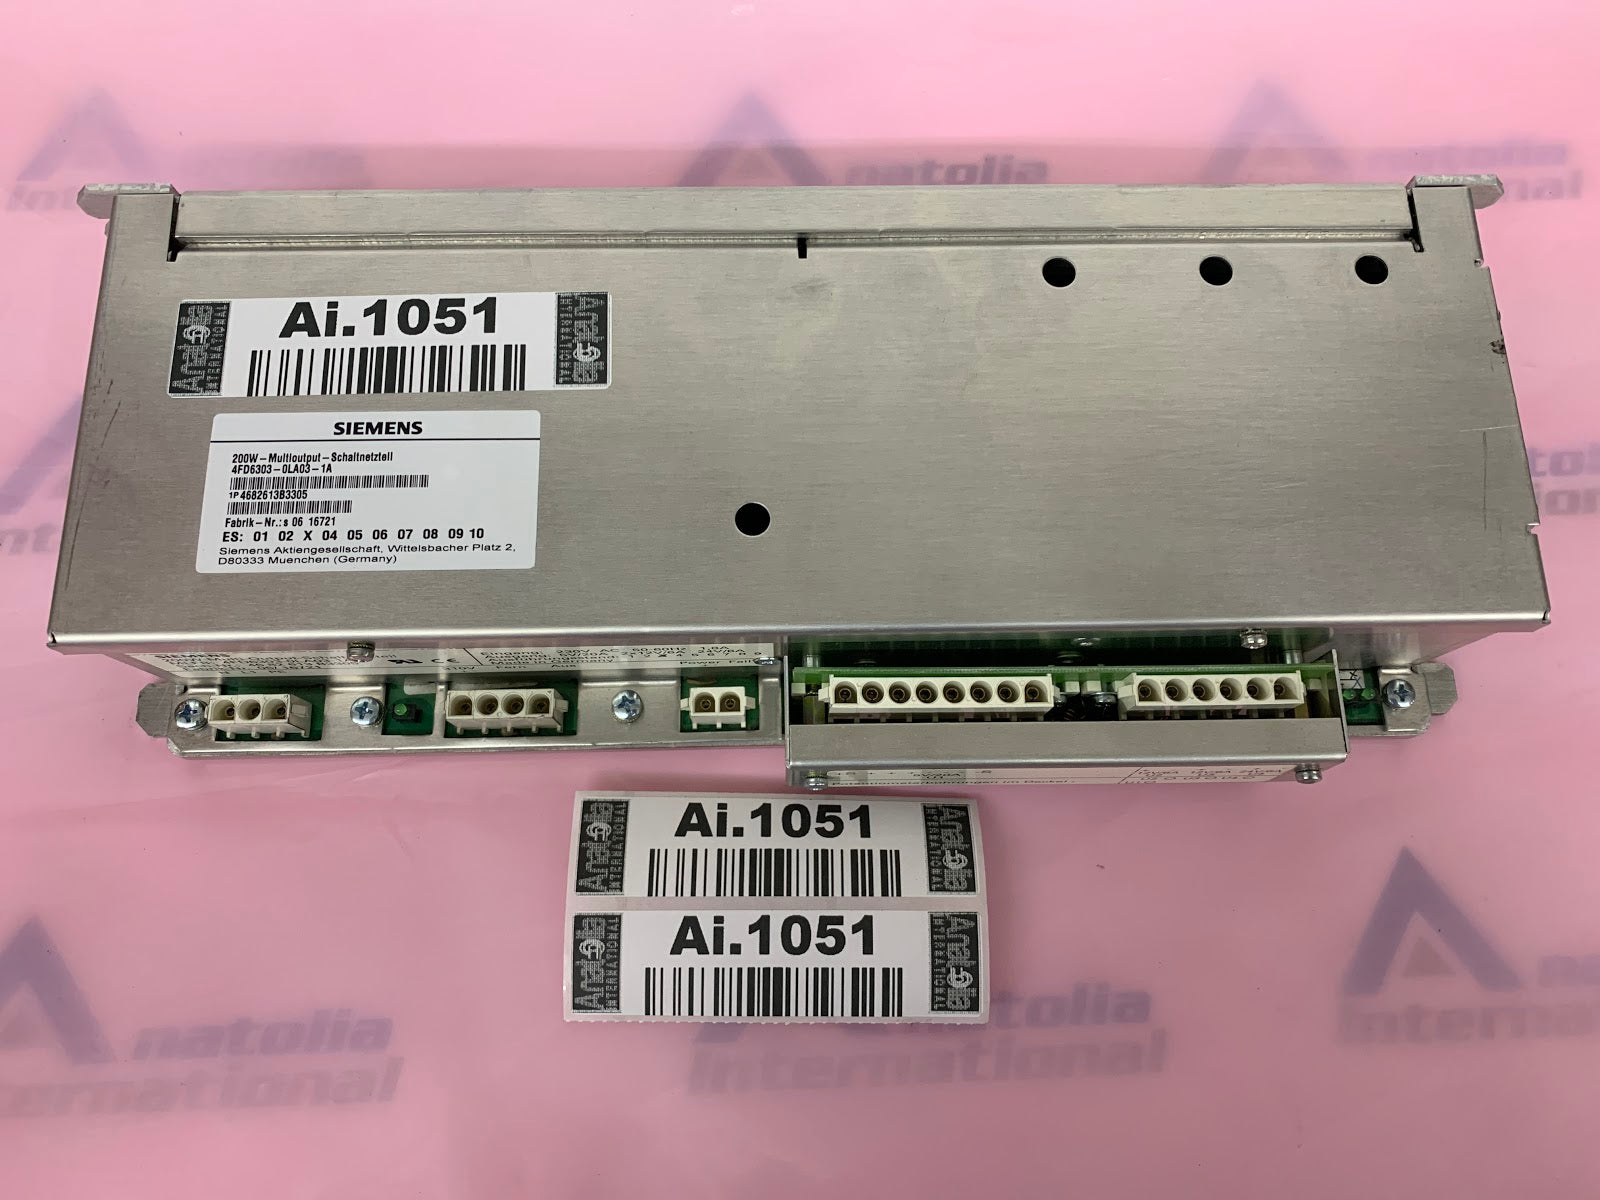 AC-DC Converter For Siemens Somatom Sensation 16 P/N: 4FD6303-0LAO3-1A
4682613. Pulled from functioning Equipment, contact for more info.